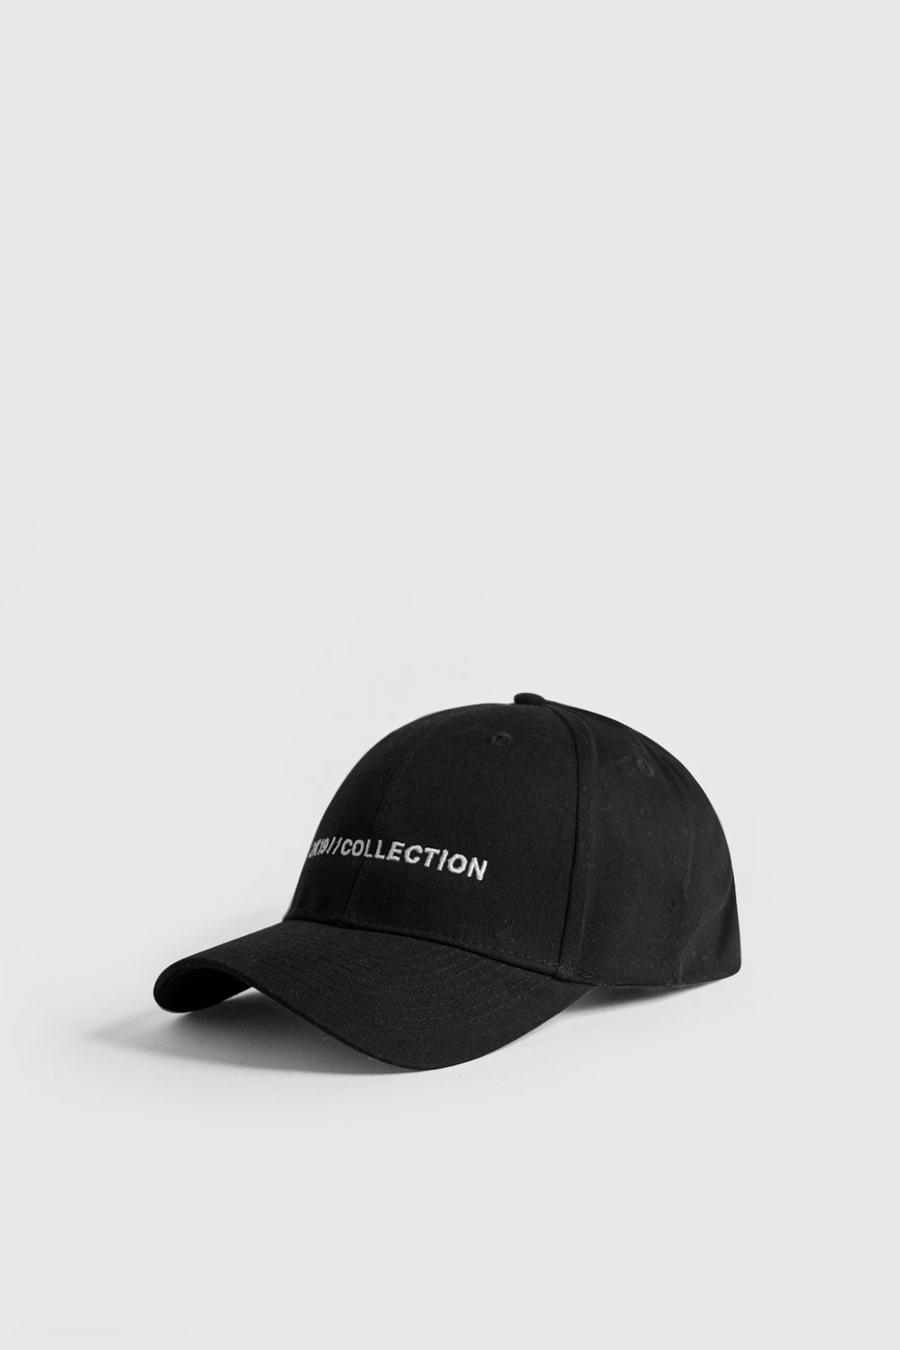 2K19 MAN Collection Embroidered Cap image number 1